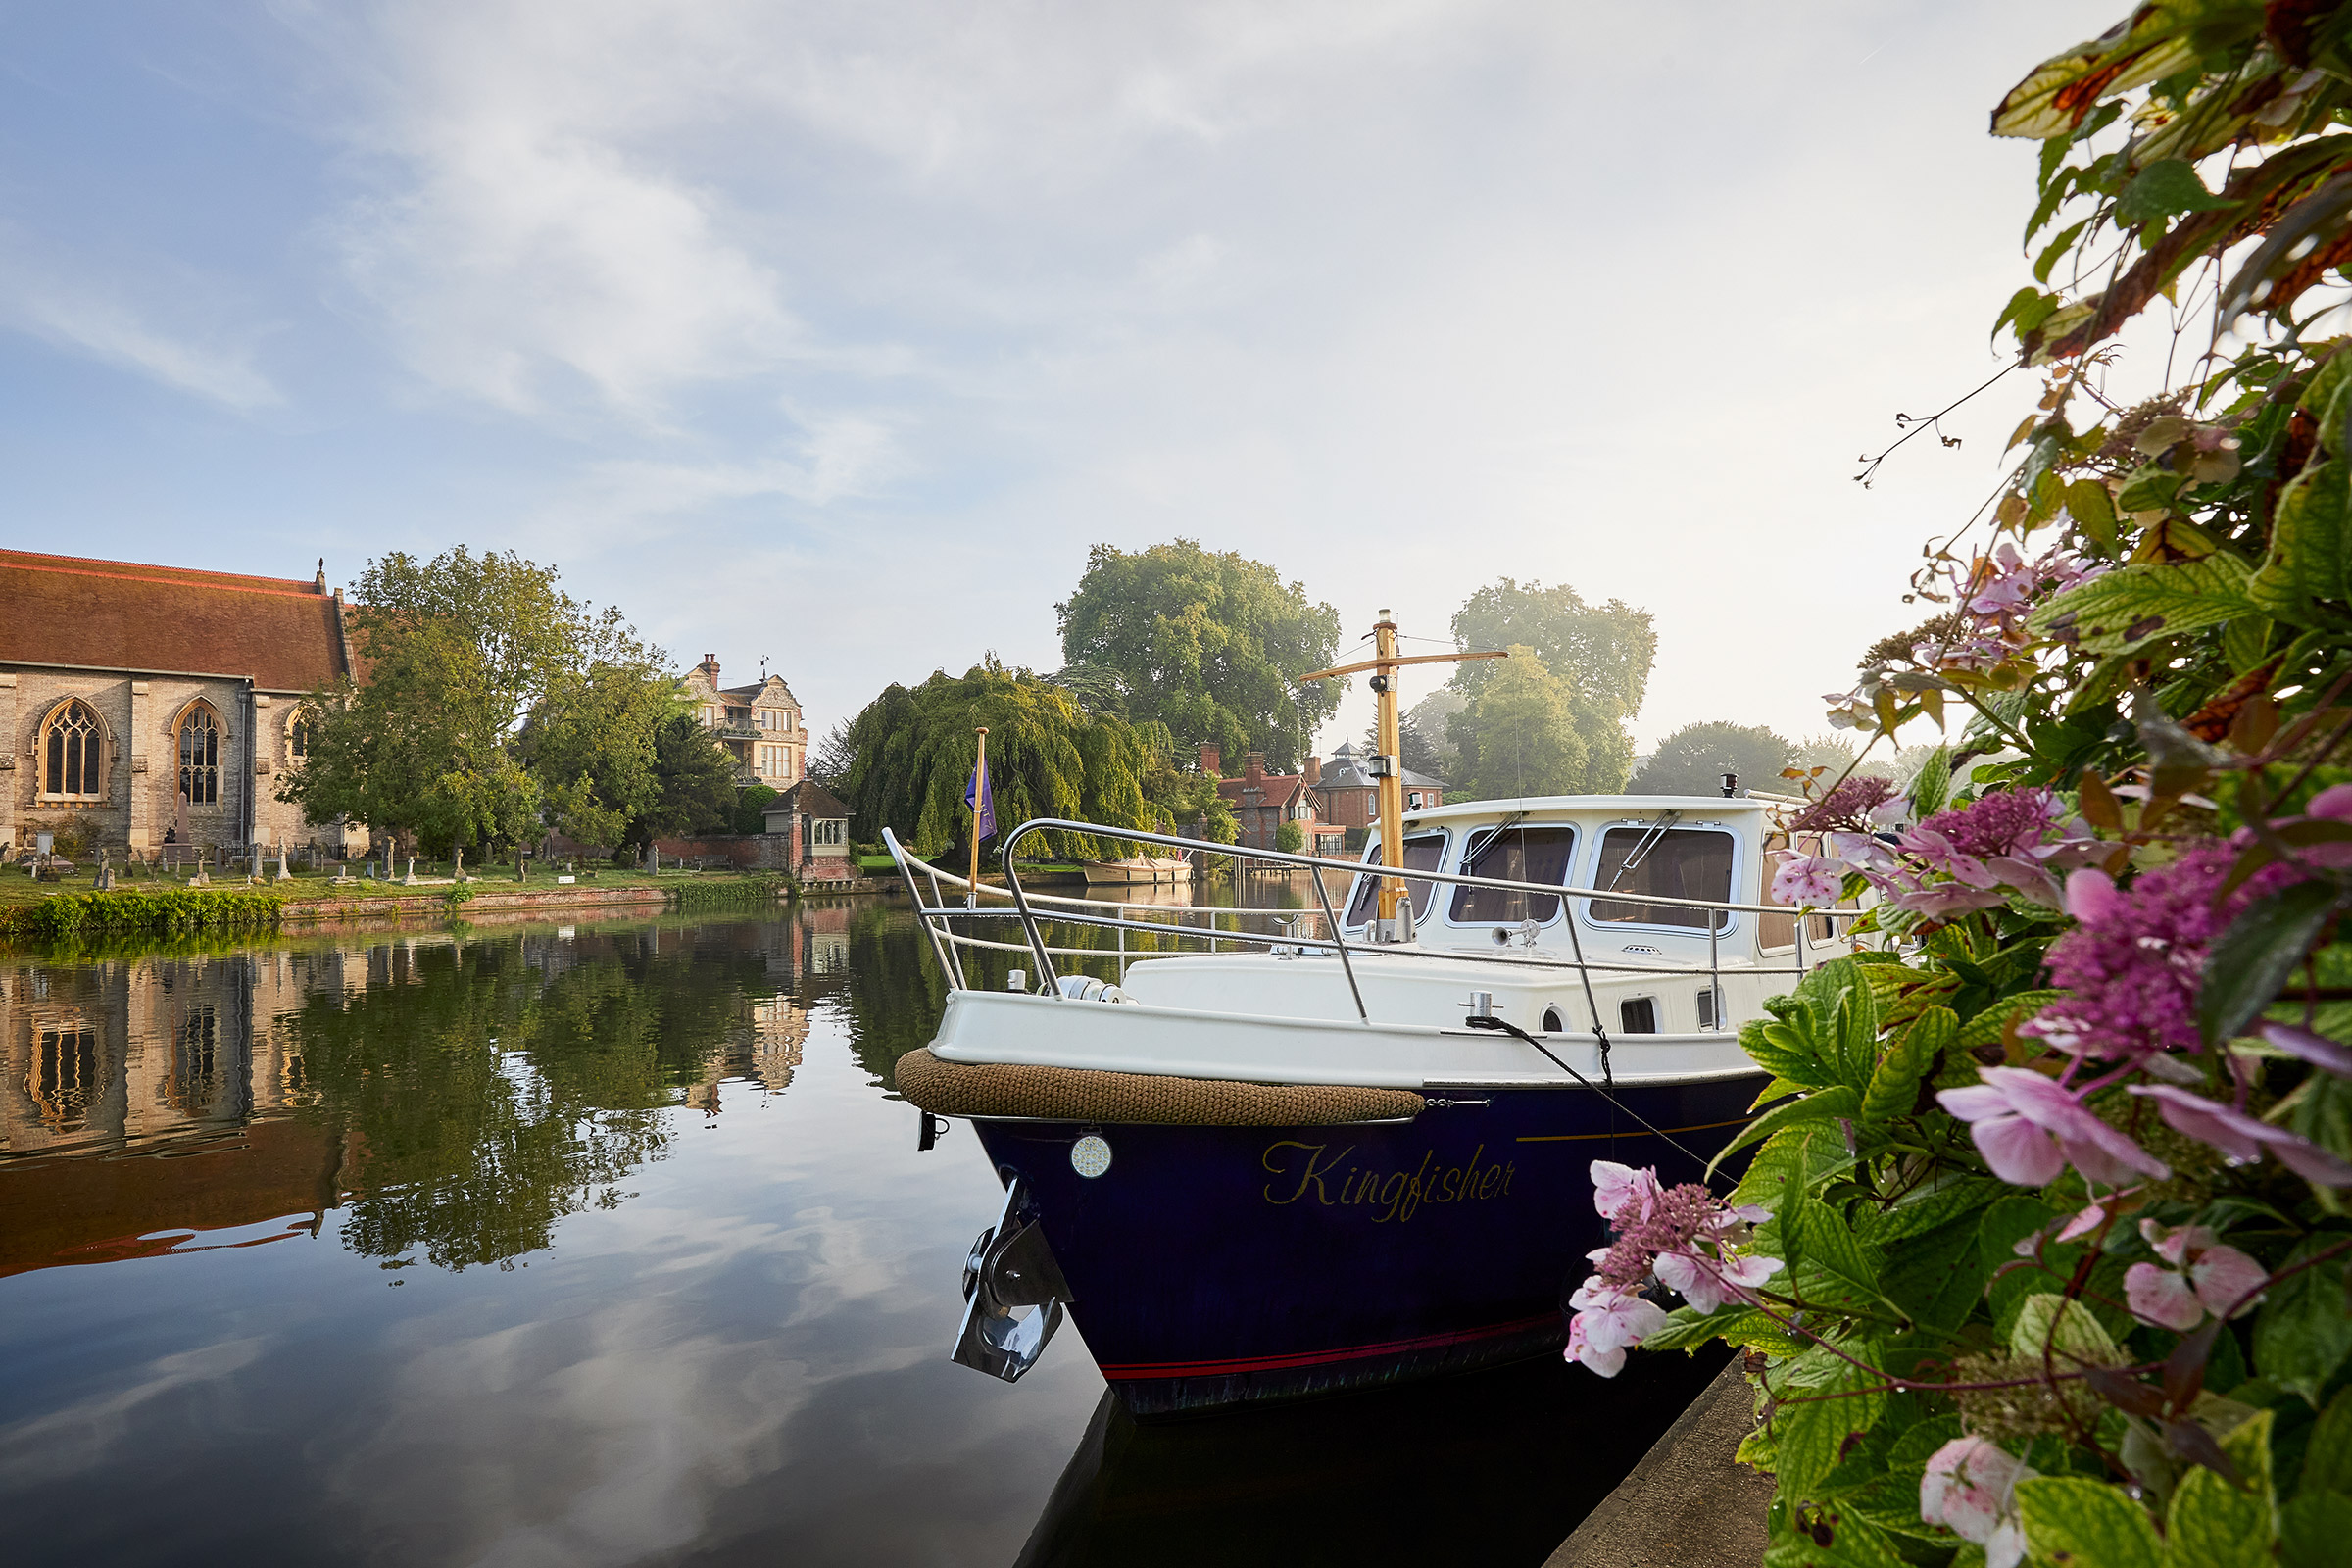 Summer Dawn on the Thames at Marlow, Compleat Angler, lifestyle and travel photographer.